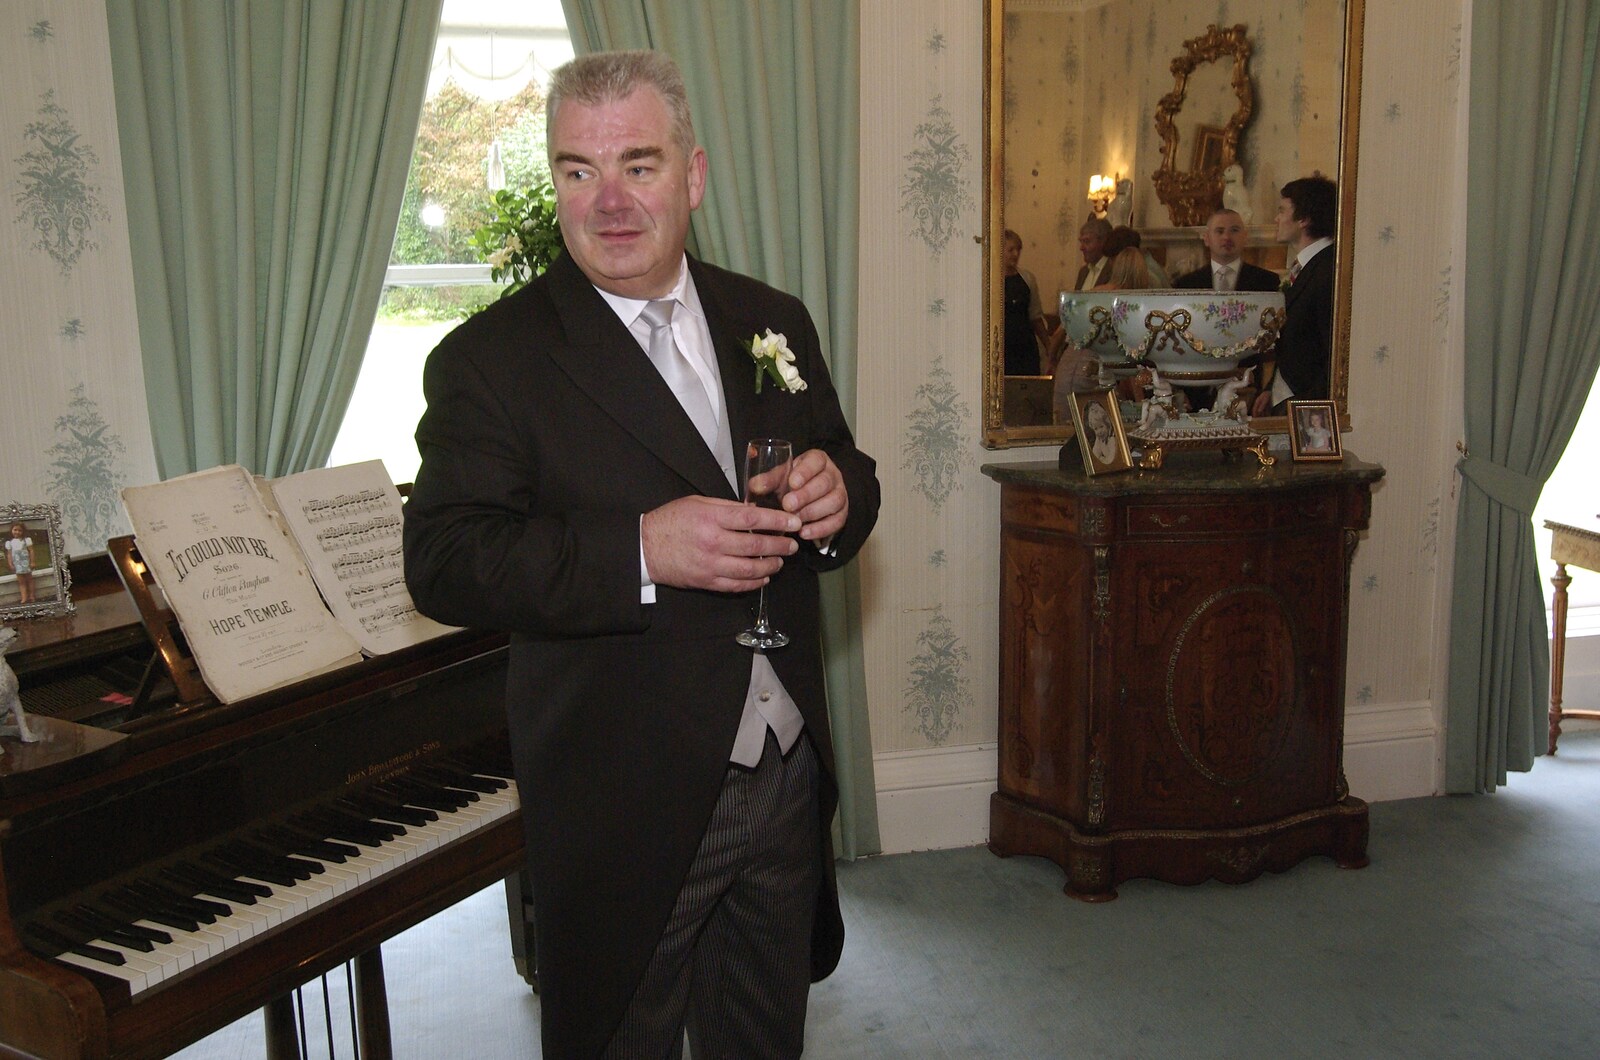 Paul and Jenny's Wedding, Tralee, County Kerry, Ireland - 3rd May 2008: Standing by a piano